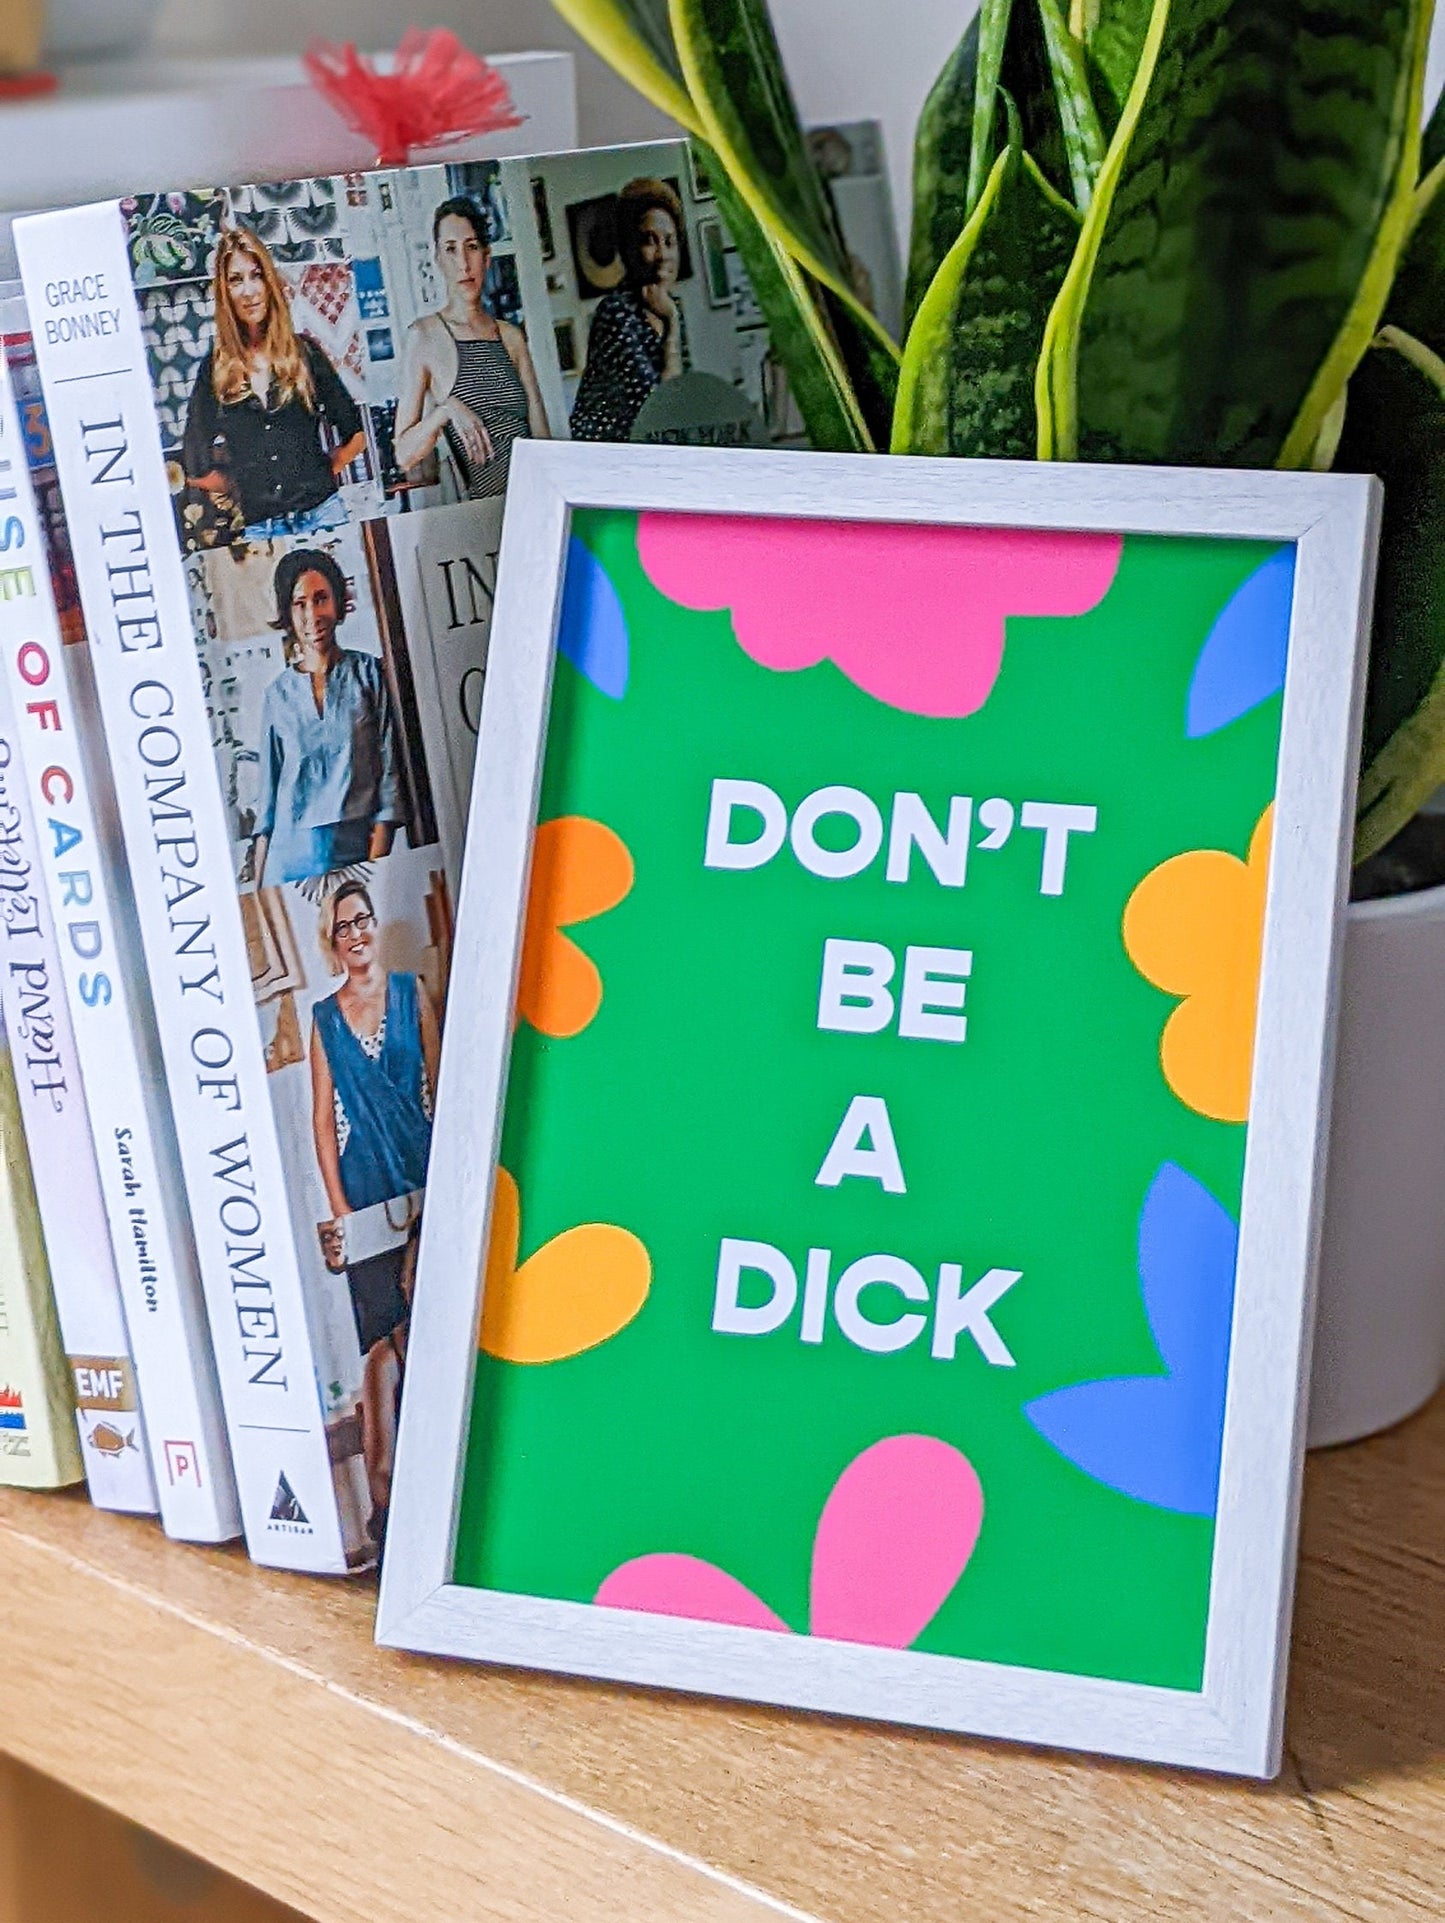 Don't Be A Dick print